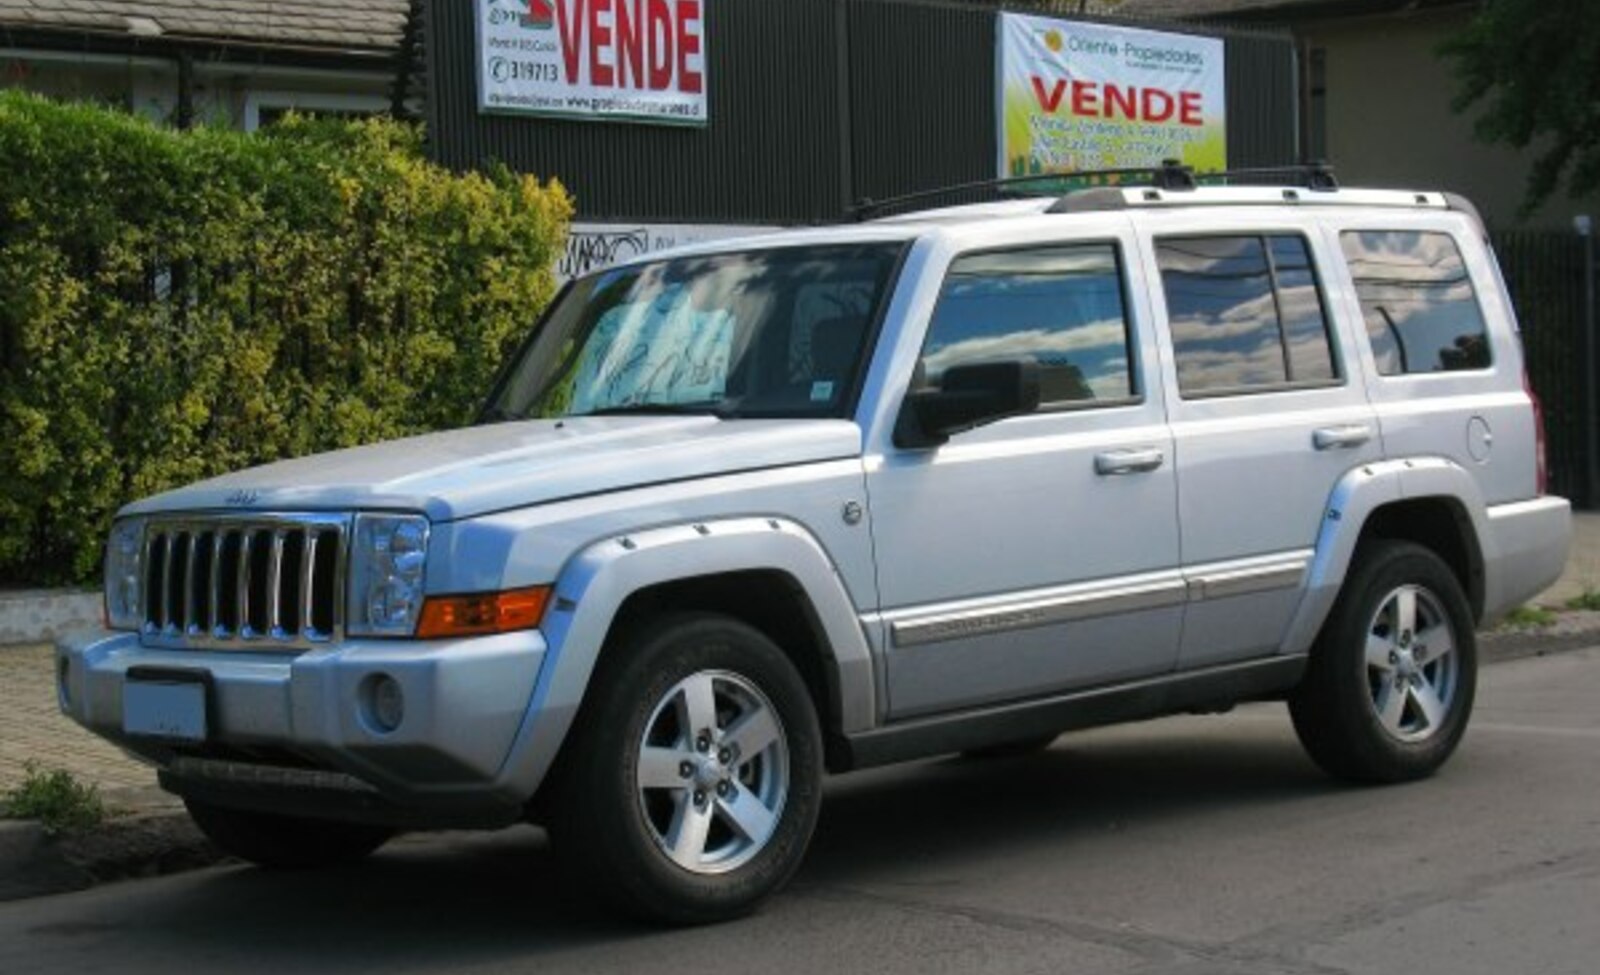 Jeep Commander 3.7 i V6 (213 Hp) 4WD Automatic 2006, 2007, 2008, 2009, 2010